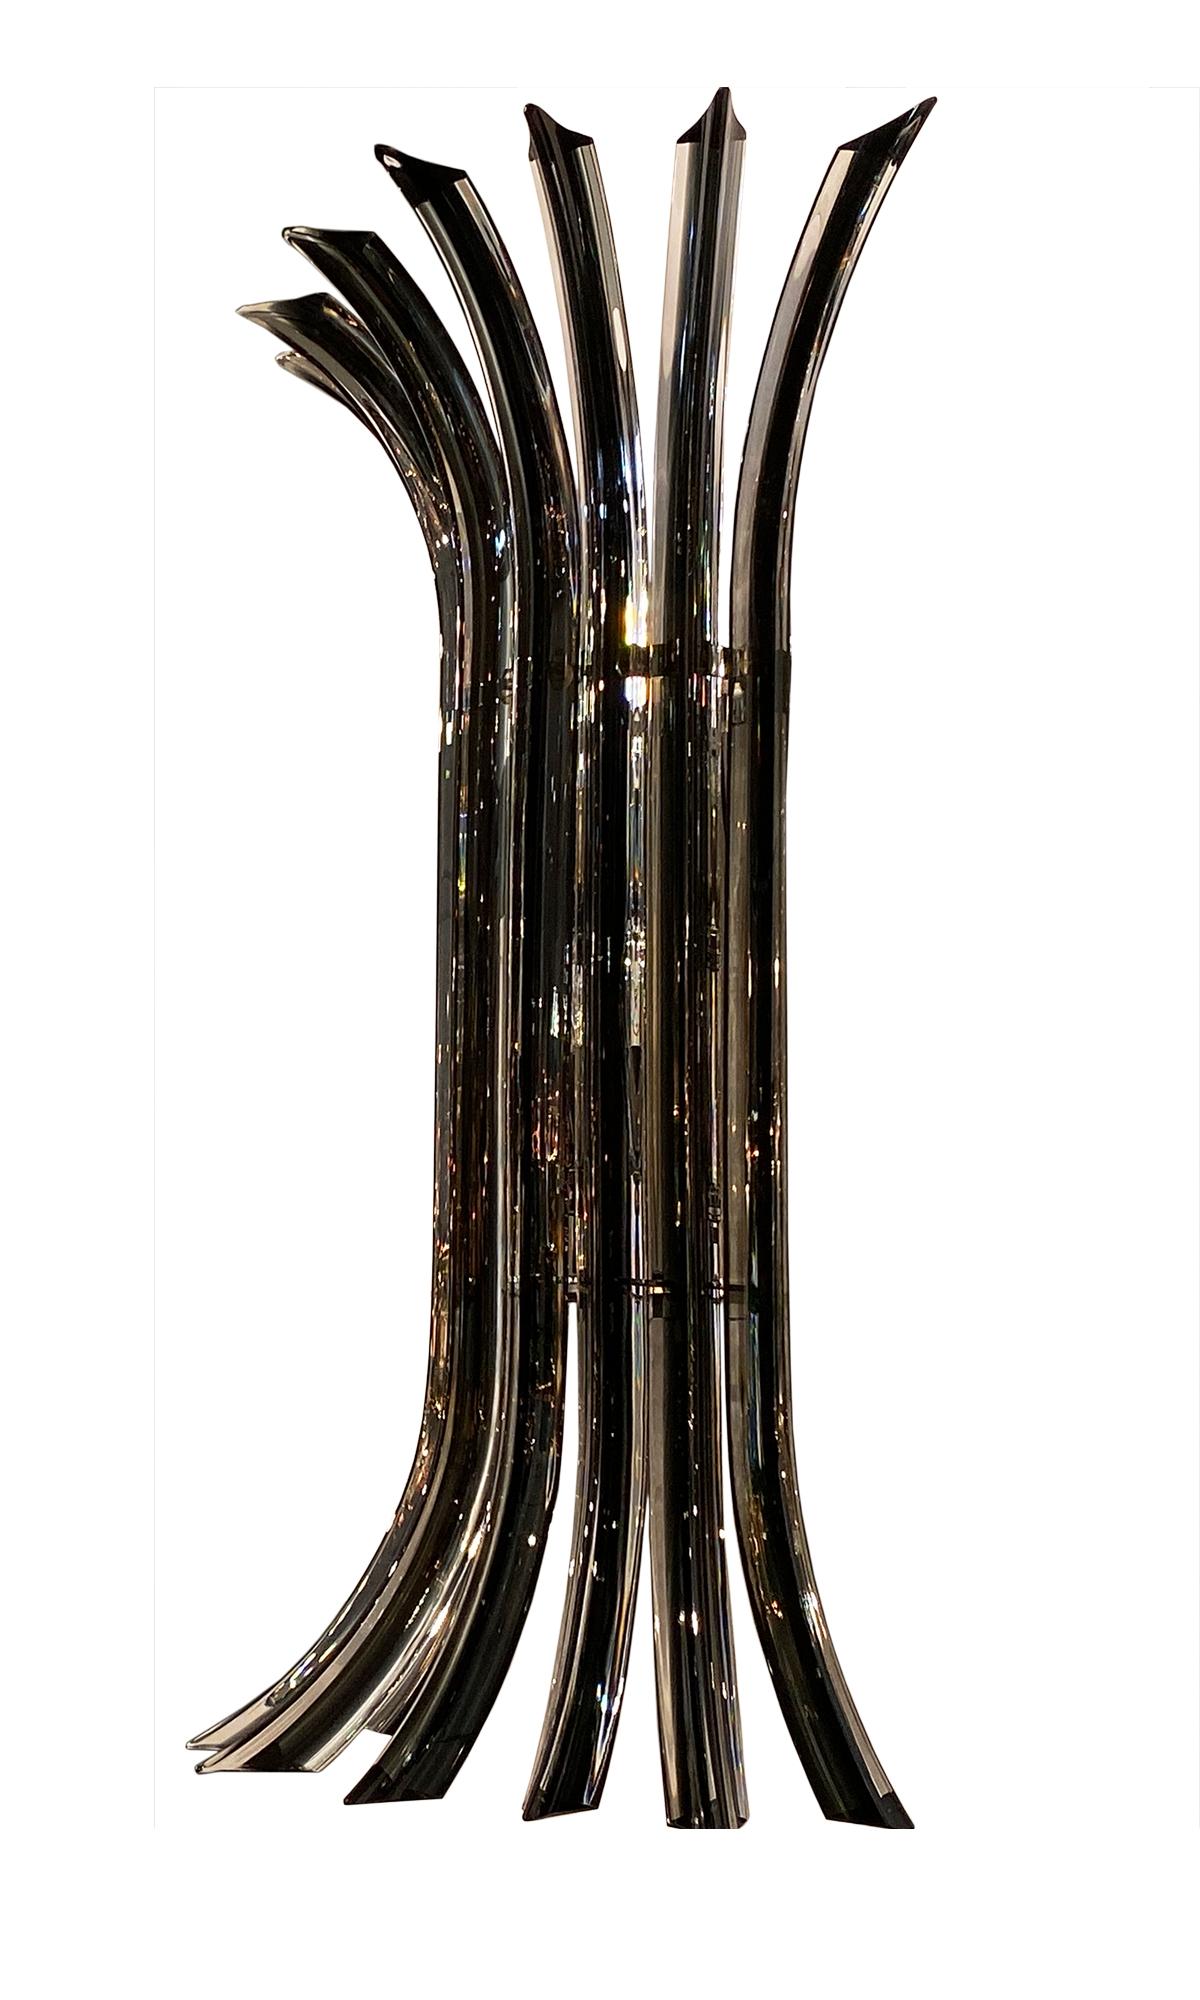 Italian hand blown Murano glass sconces by Venini made of eight curved rods in clear glass with a deep black glass core in the ‘Filigrana’ technique. The light bounces beautifully off the “Triedi” (three faceted) rods, creating a mesmerizing effect.